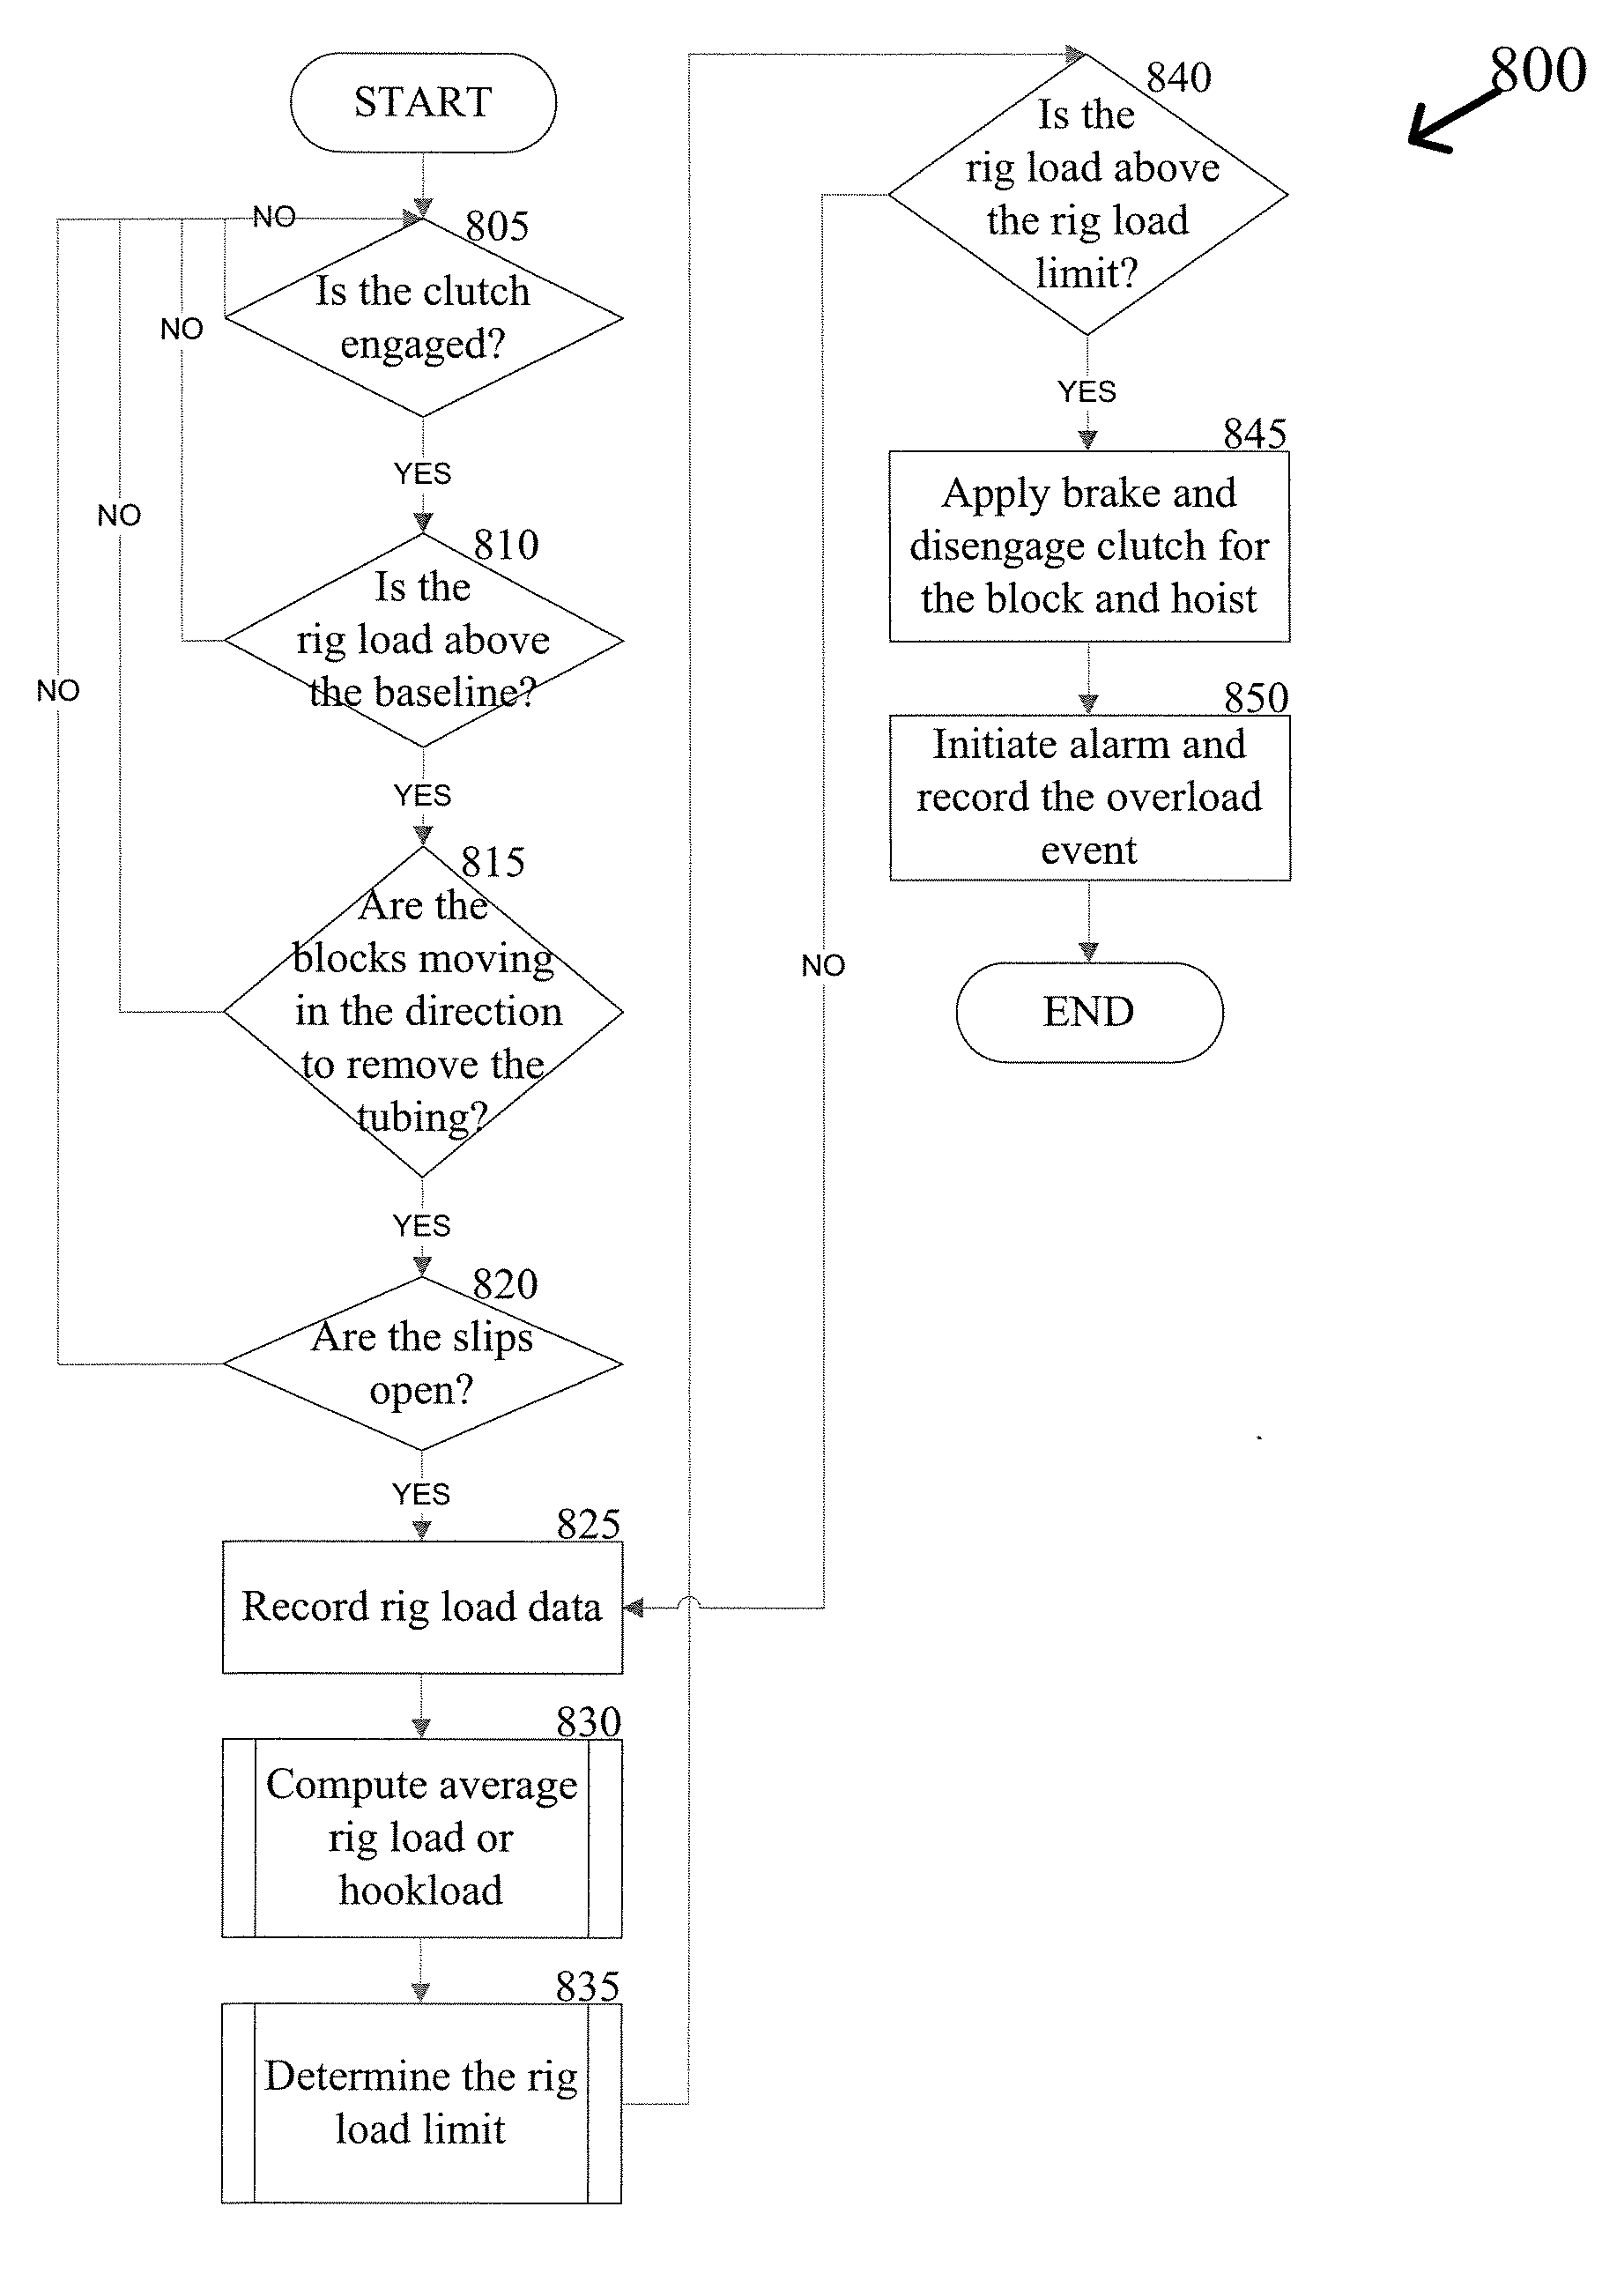 Method and System for Controlling a Well Service Rig Based on Load Data